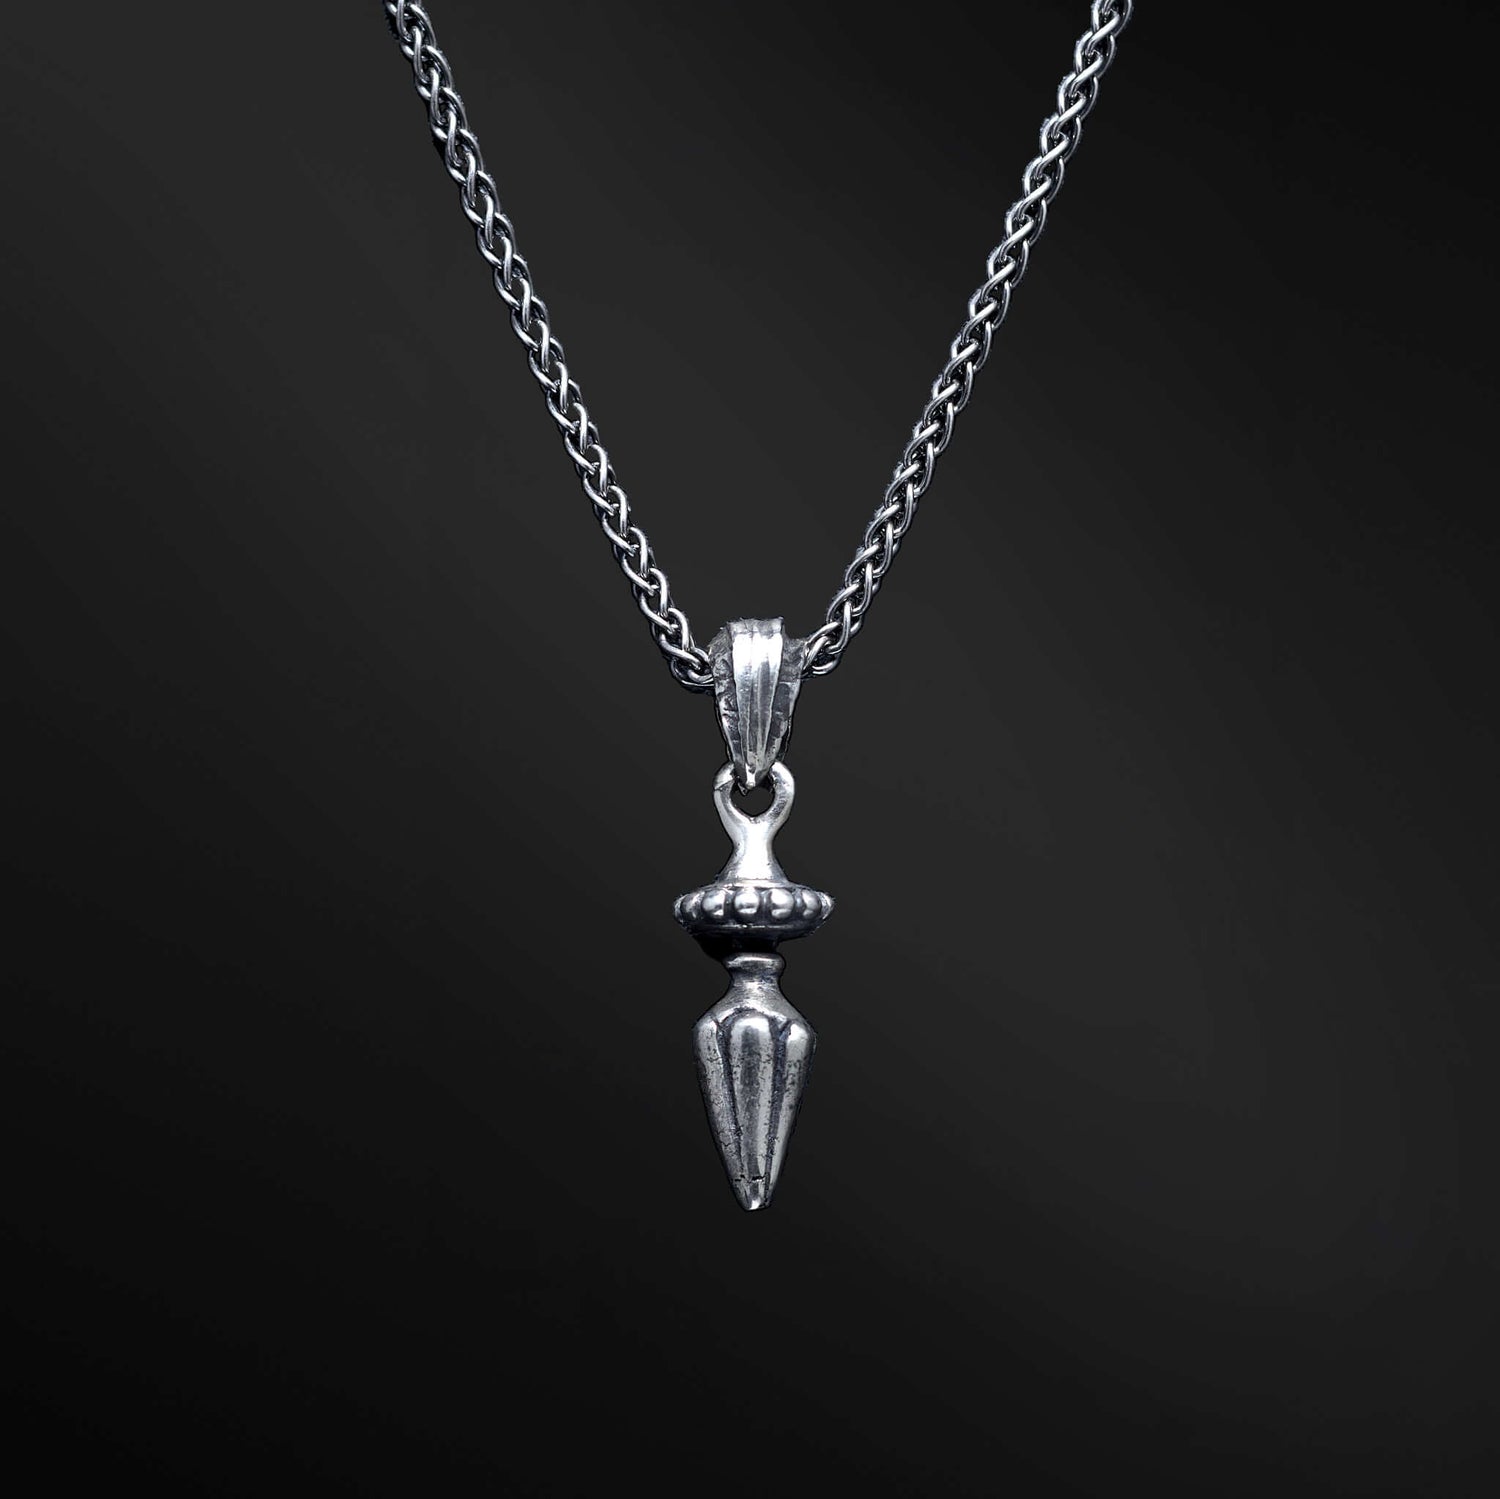 &quot;David Sword Pendant: An image capturing the embodiment of inner strength in the David Sword pendant. Crafted with finesse, this sleek pendant takes the form of a powerful sword. Its elegant design beautifully encapsulates the essence of courage and determination. When worn, it serves as a symbolic reminder of resilience and fearlessness, inspiring you to confront challenges head-on. Let this pendant empower and embolden your spirit.&quot;